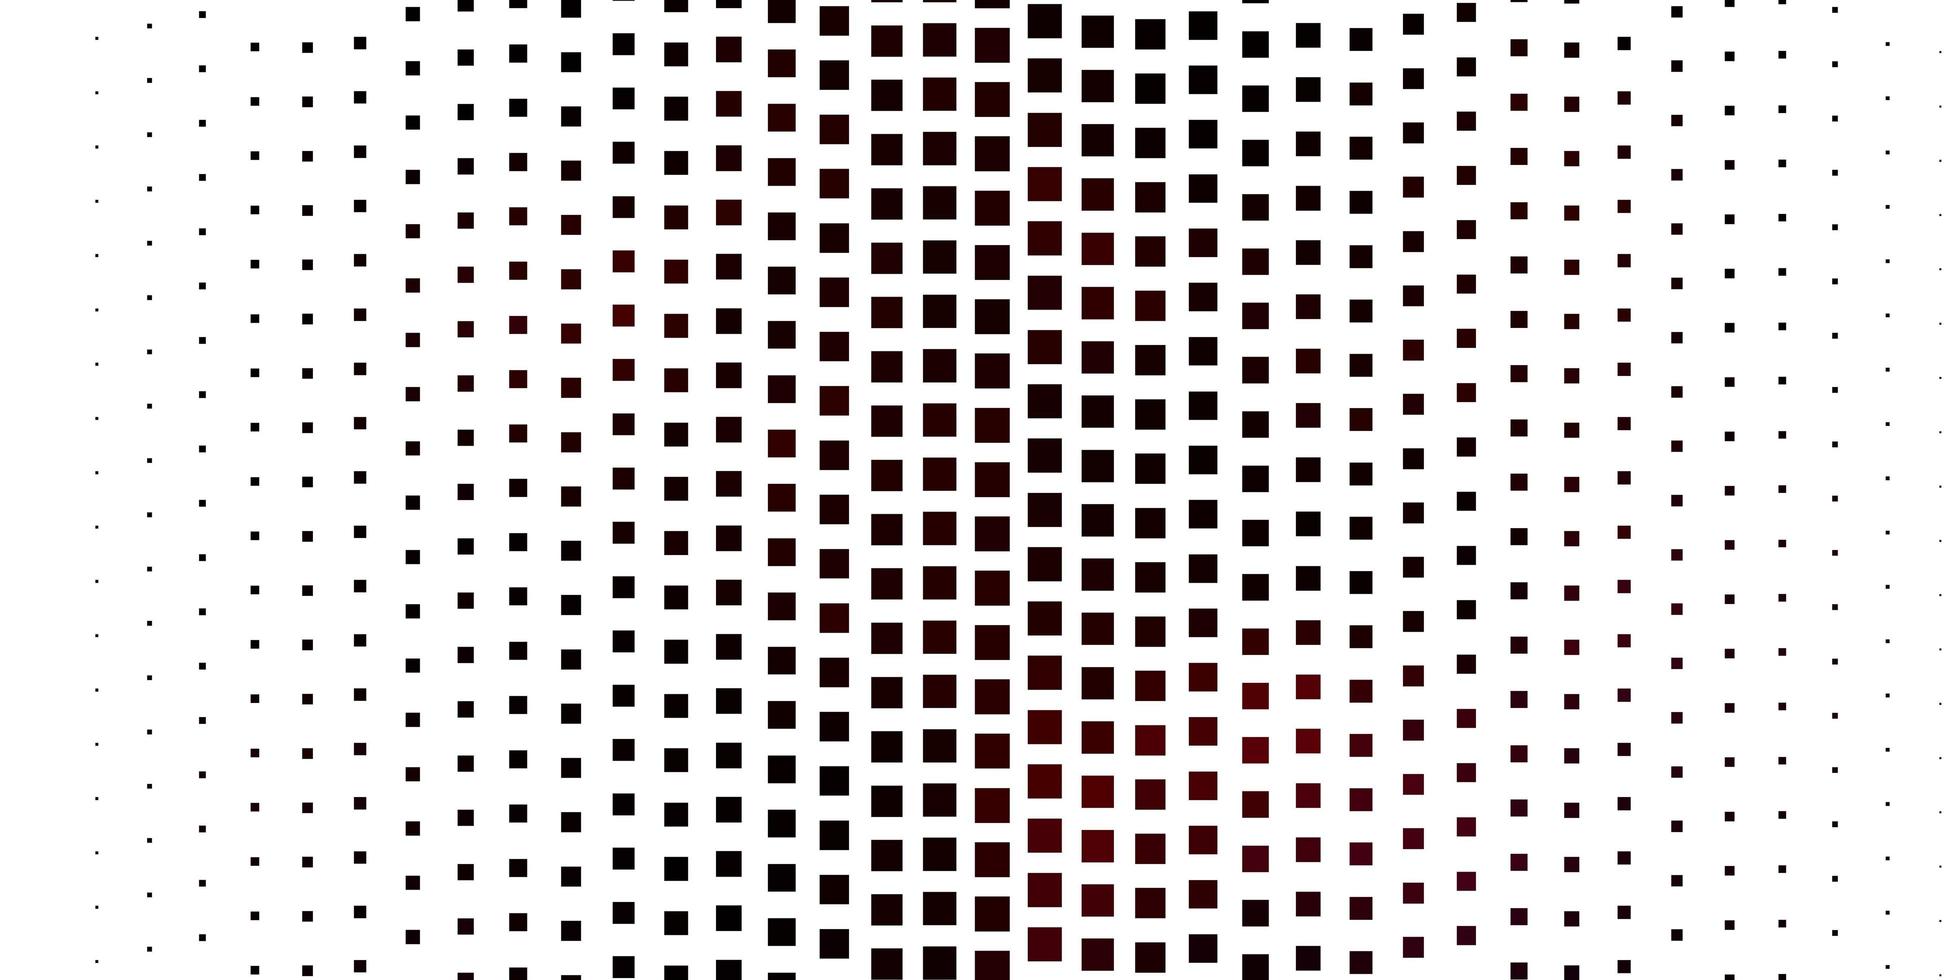 Dark Red vector background with rectangles. Abstract gradient illustration with rectangles. Pattern for busines booklets, leaflets